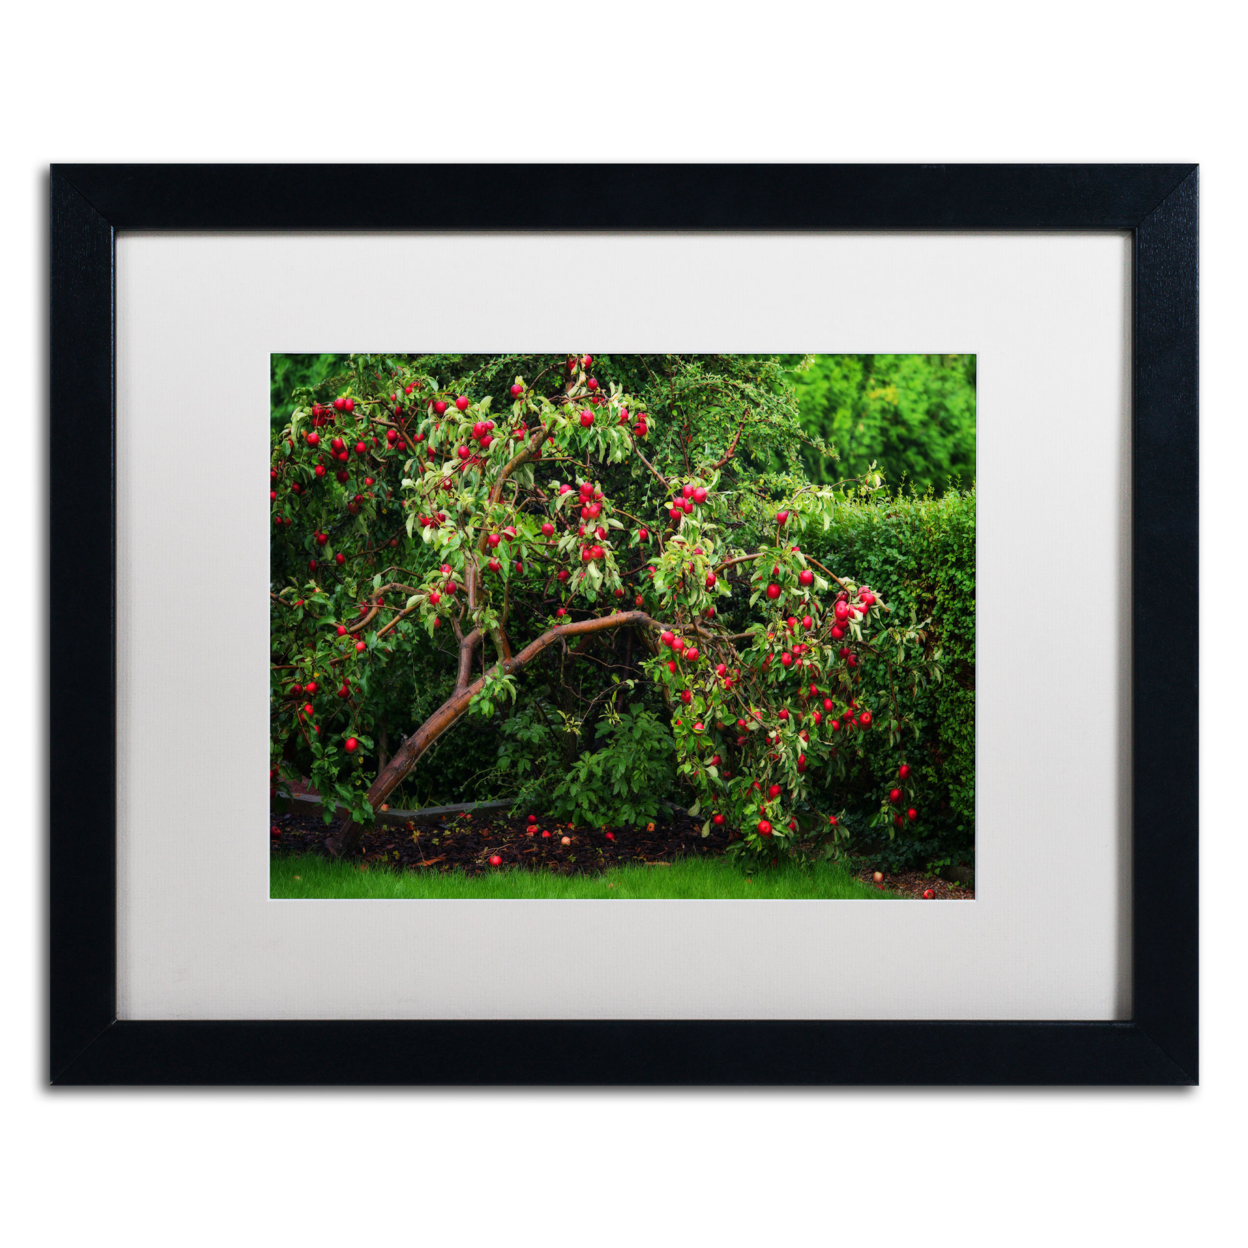 Philippe Sainte-Laudy 'The Apple Tree' Black Wooden Framed Art 18 X 22 Inches